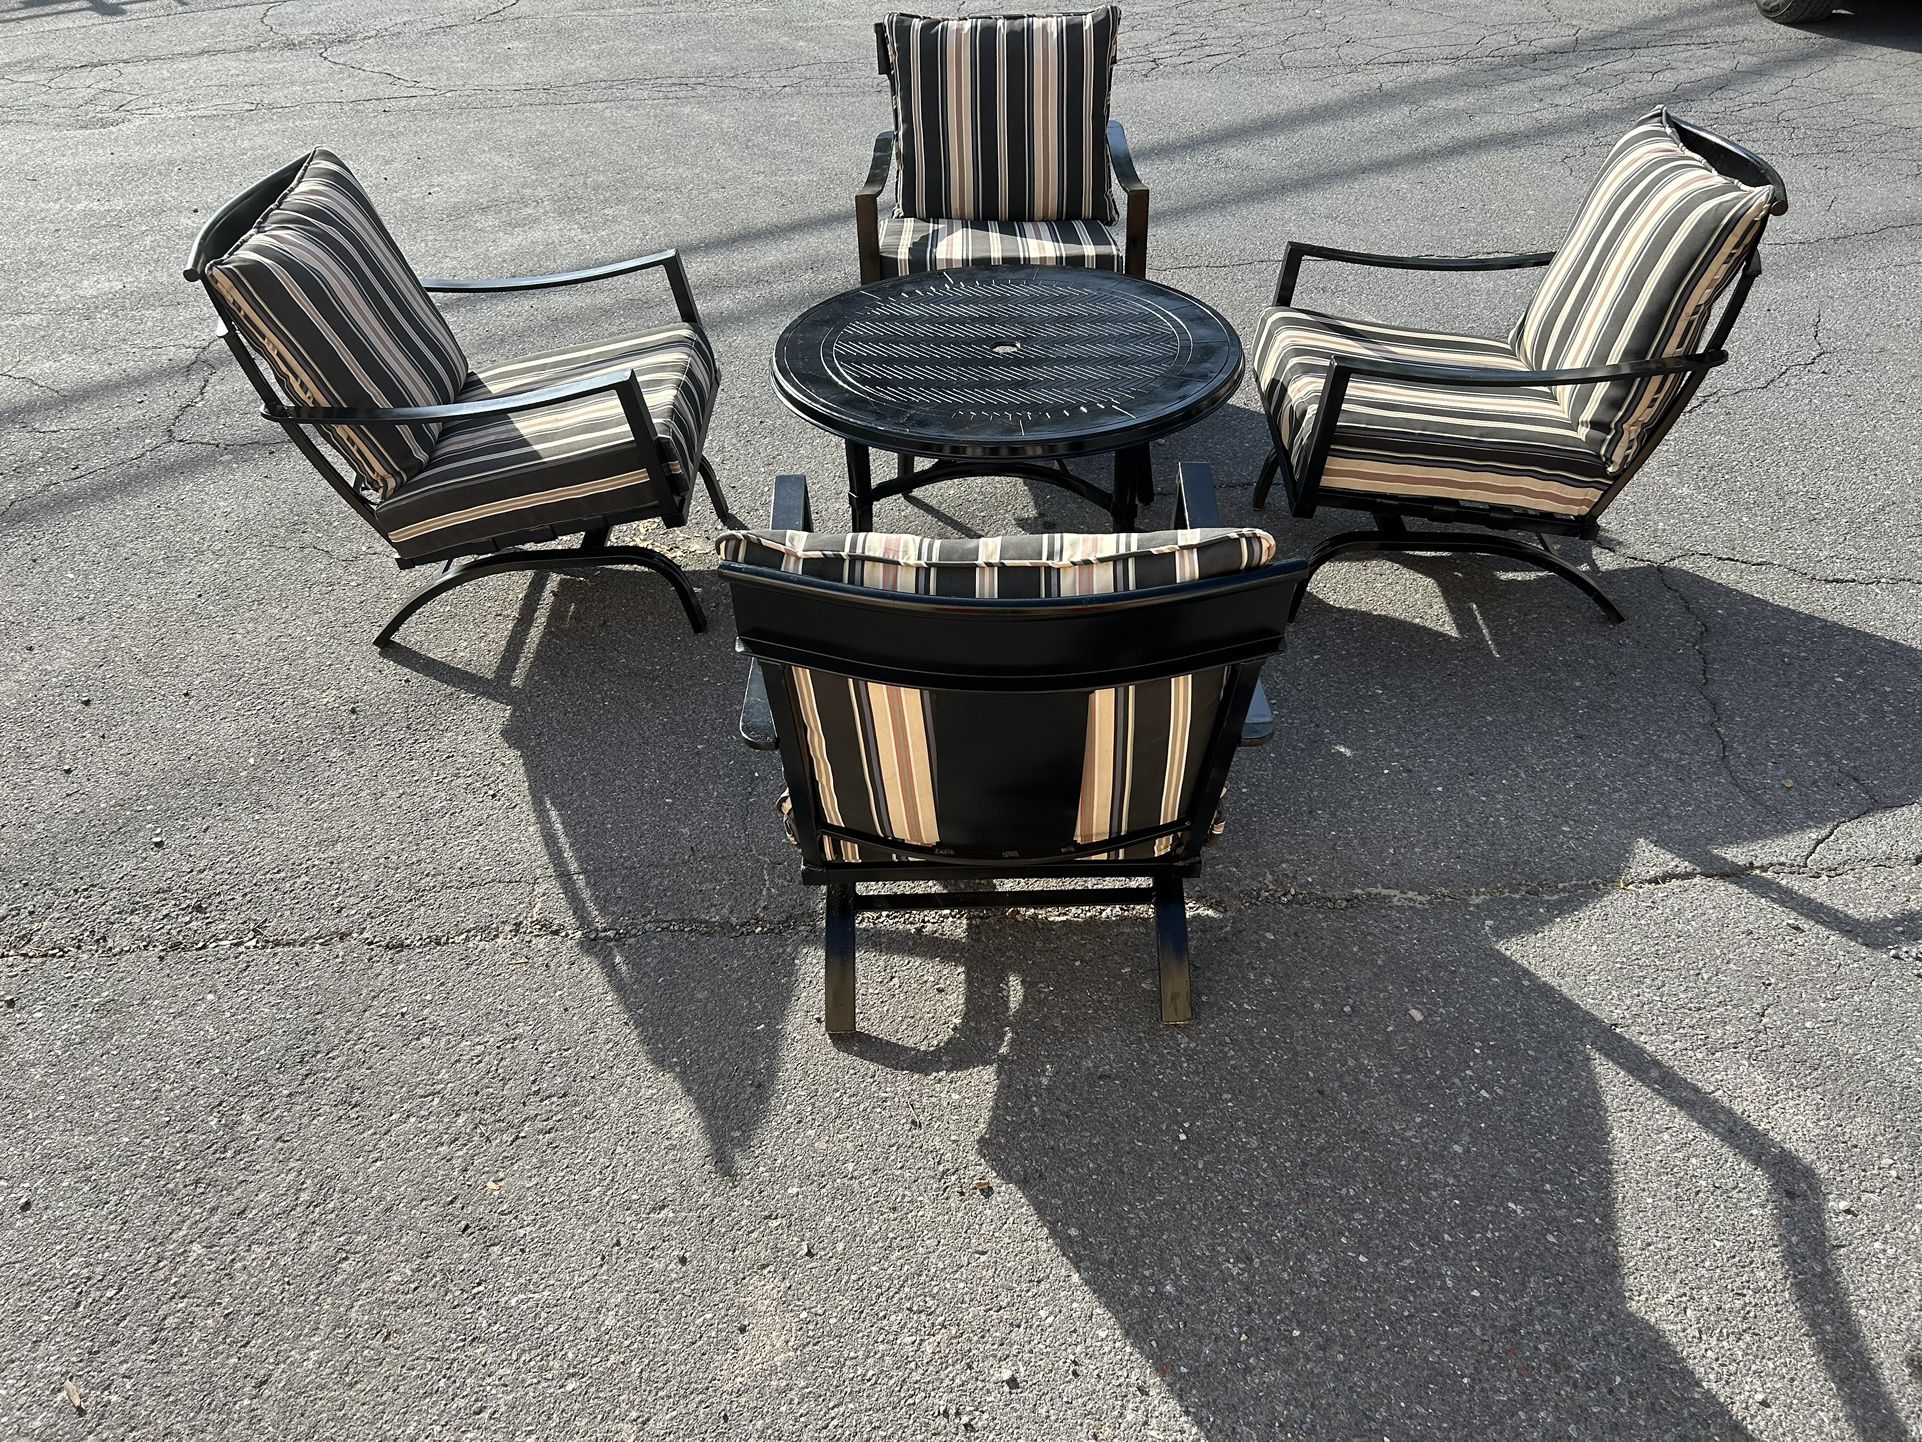 Beautiful Aluminum Conversation Set Table And 4 Chairs W/ Cushions 